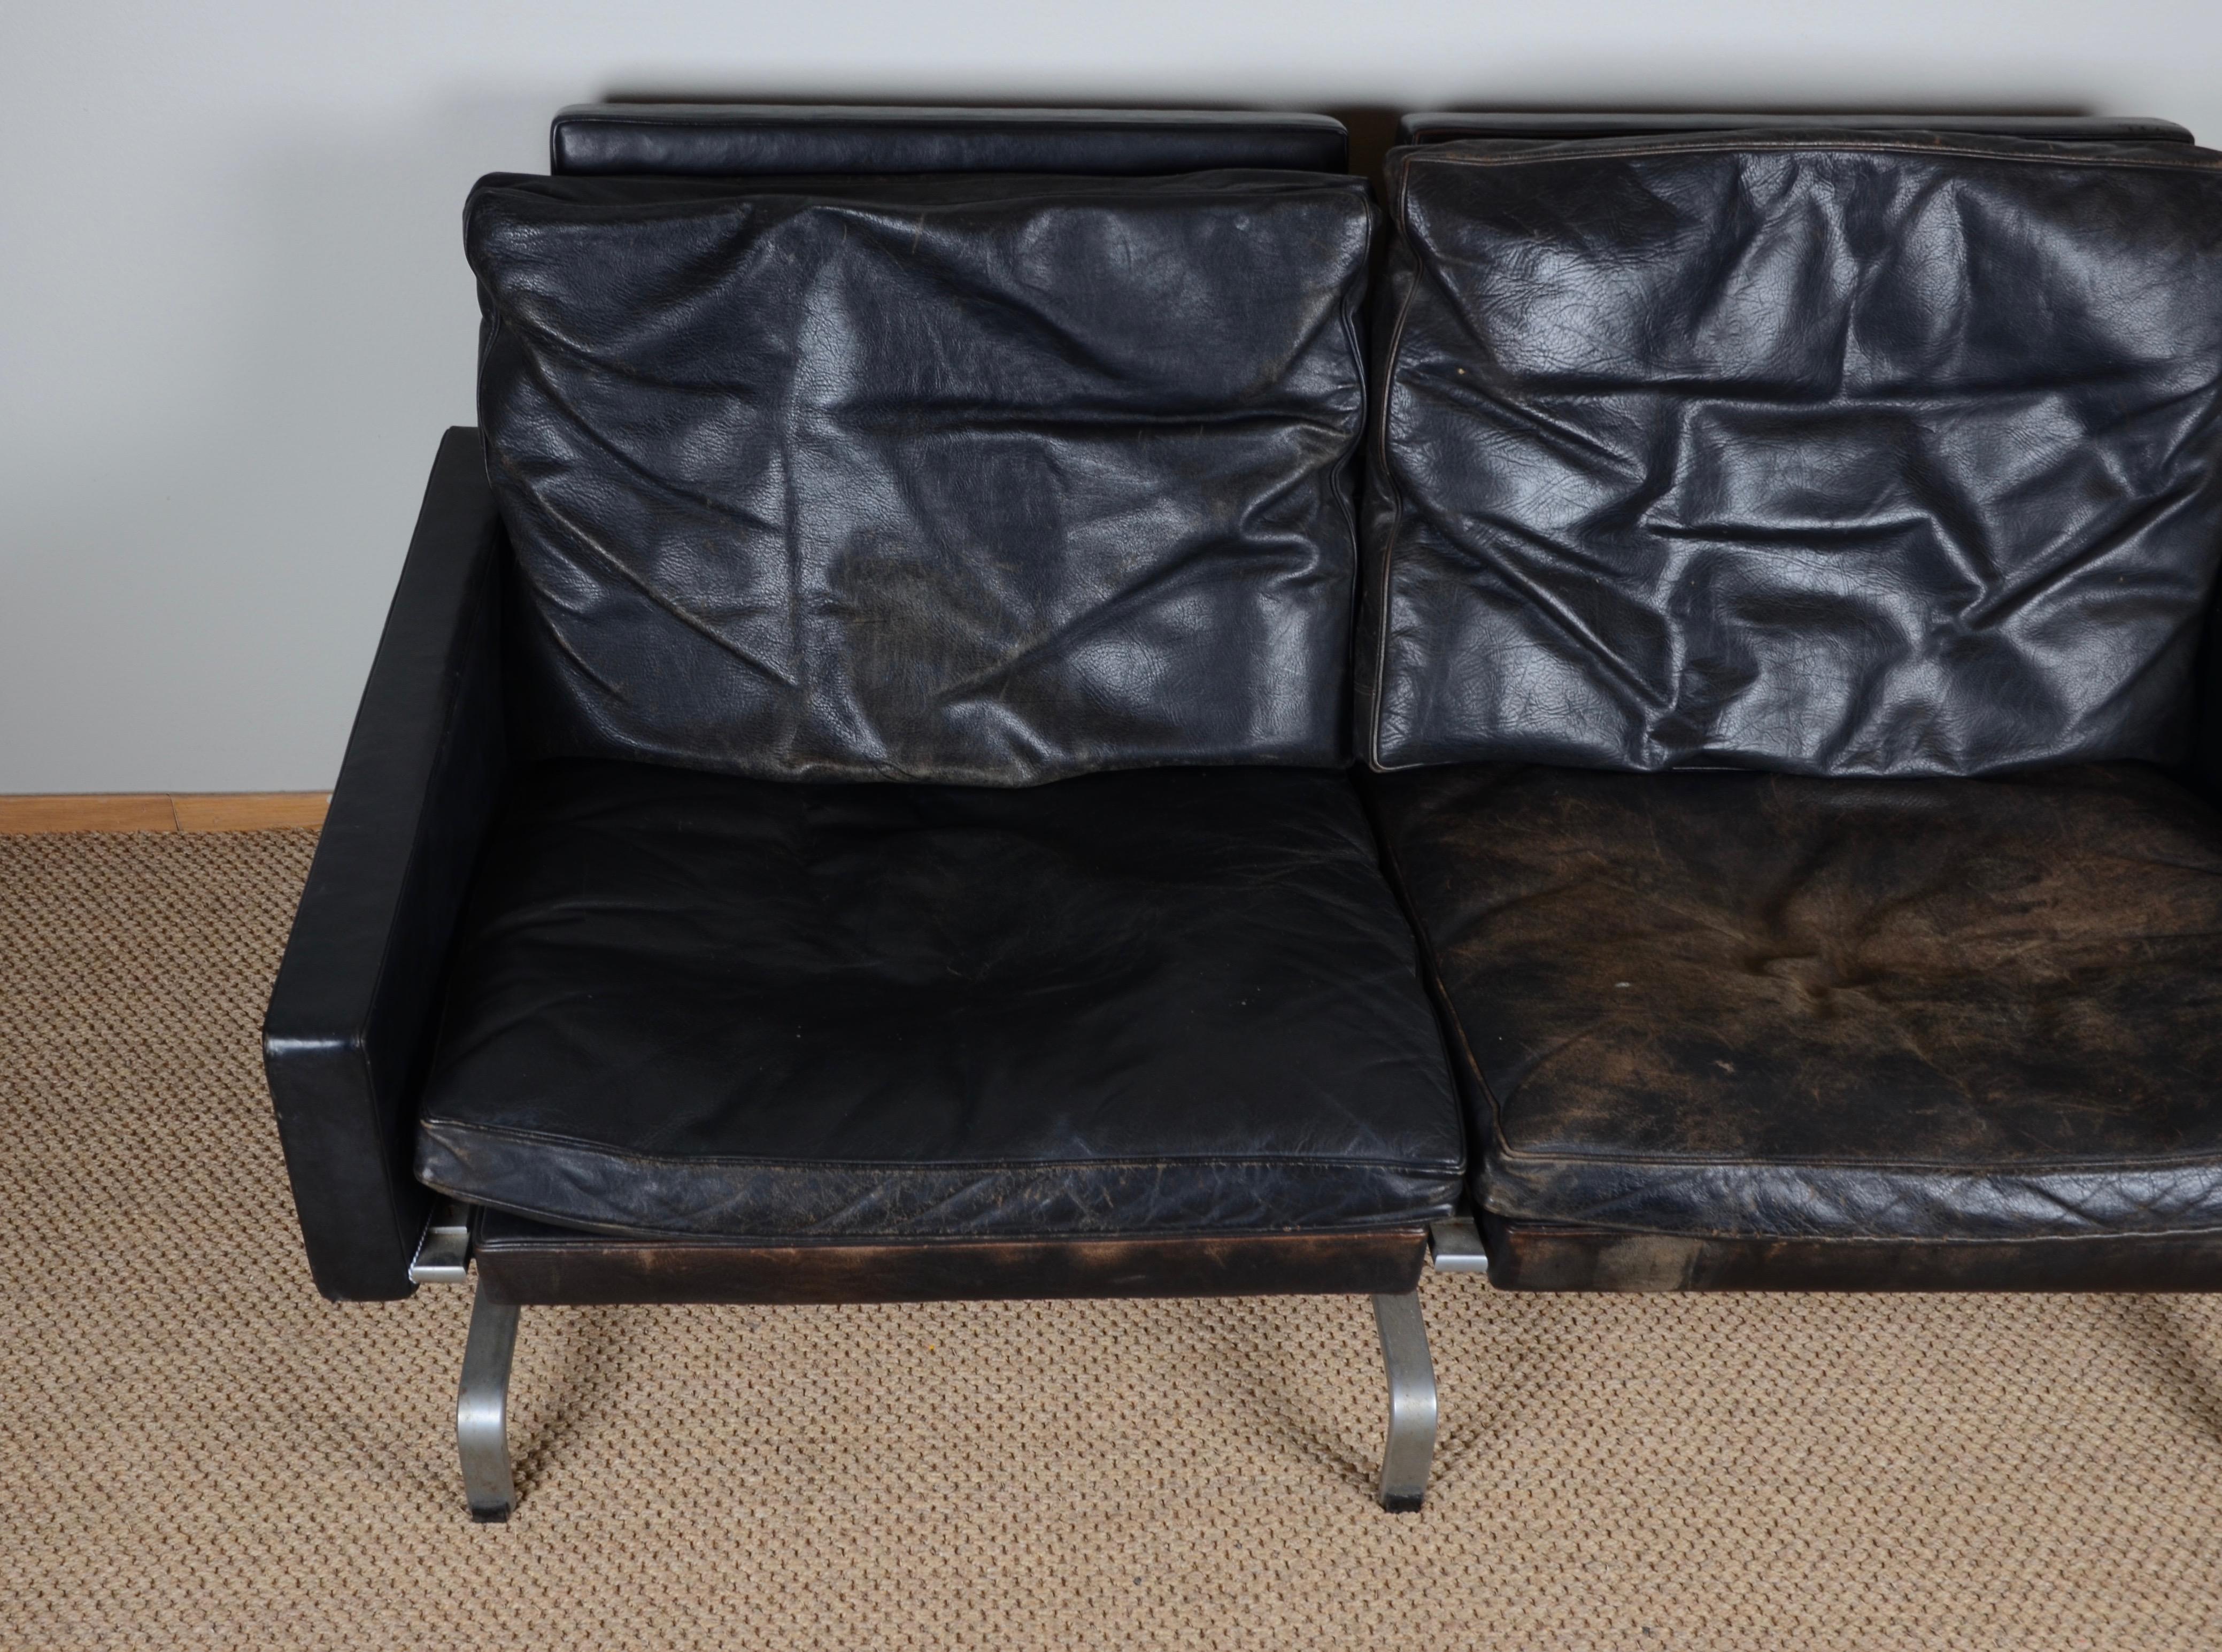 Two-seat sofa, model PK-31, designed by Poul Kjærholm for E. Kold Christensen. Black leather and matt polished steel. Denmark, mid-1900s. 2 pieces available, price per piece.

Maker’s mark in the steel.